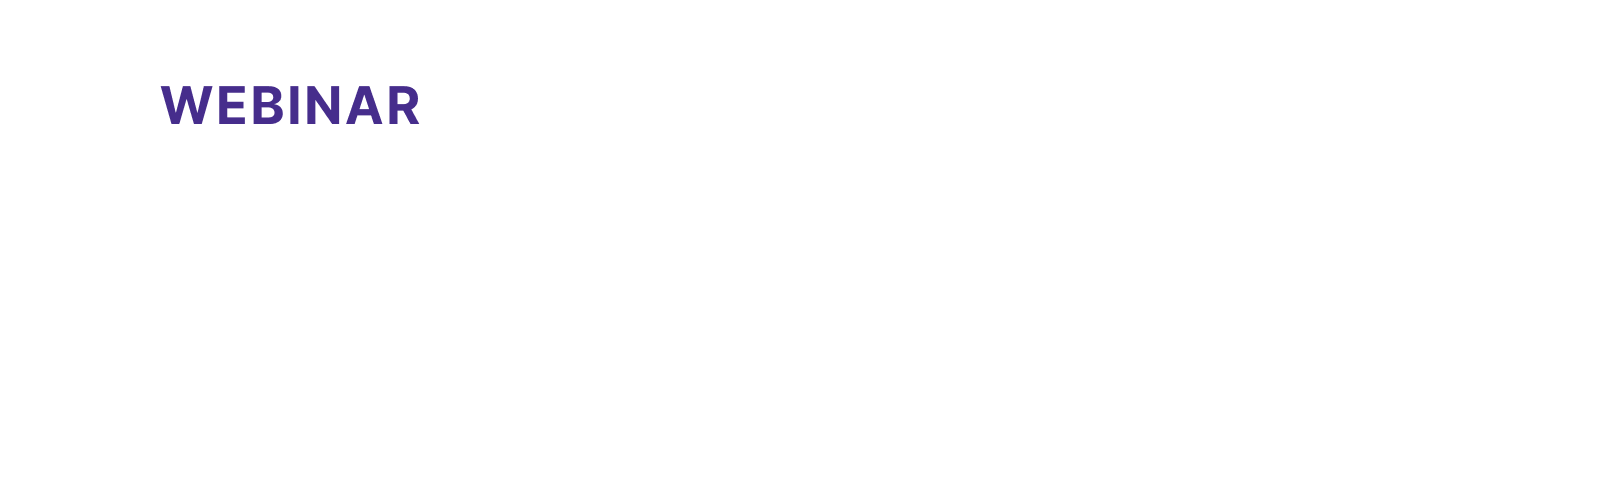 2022 State of Video